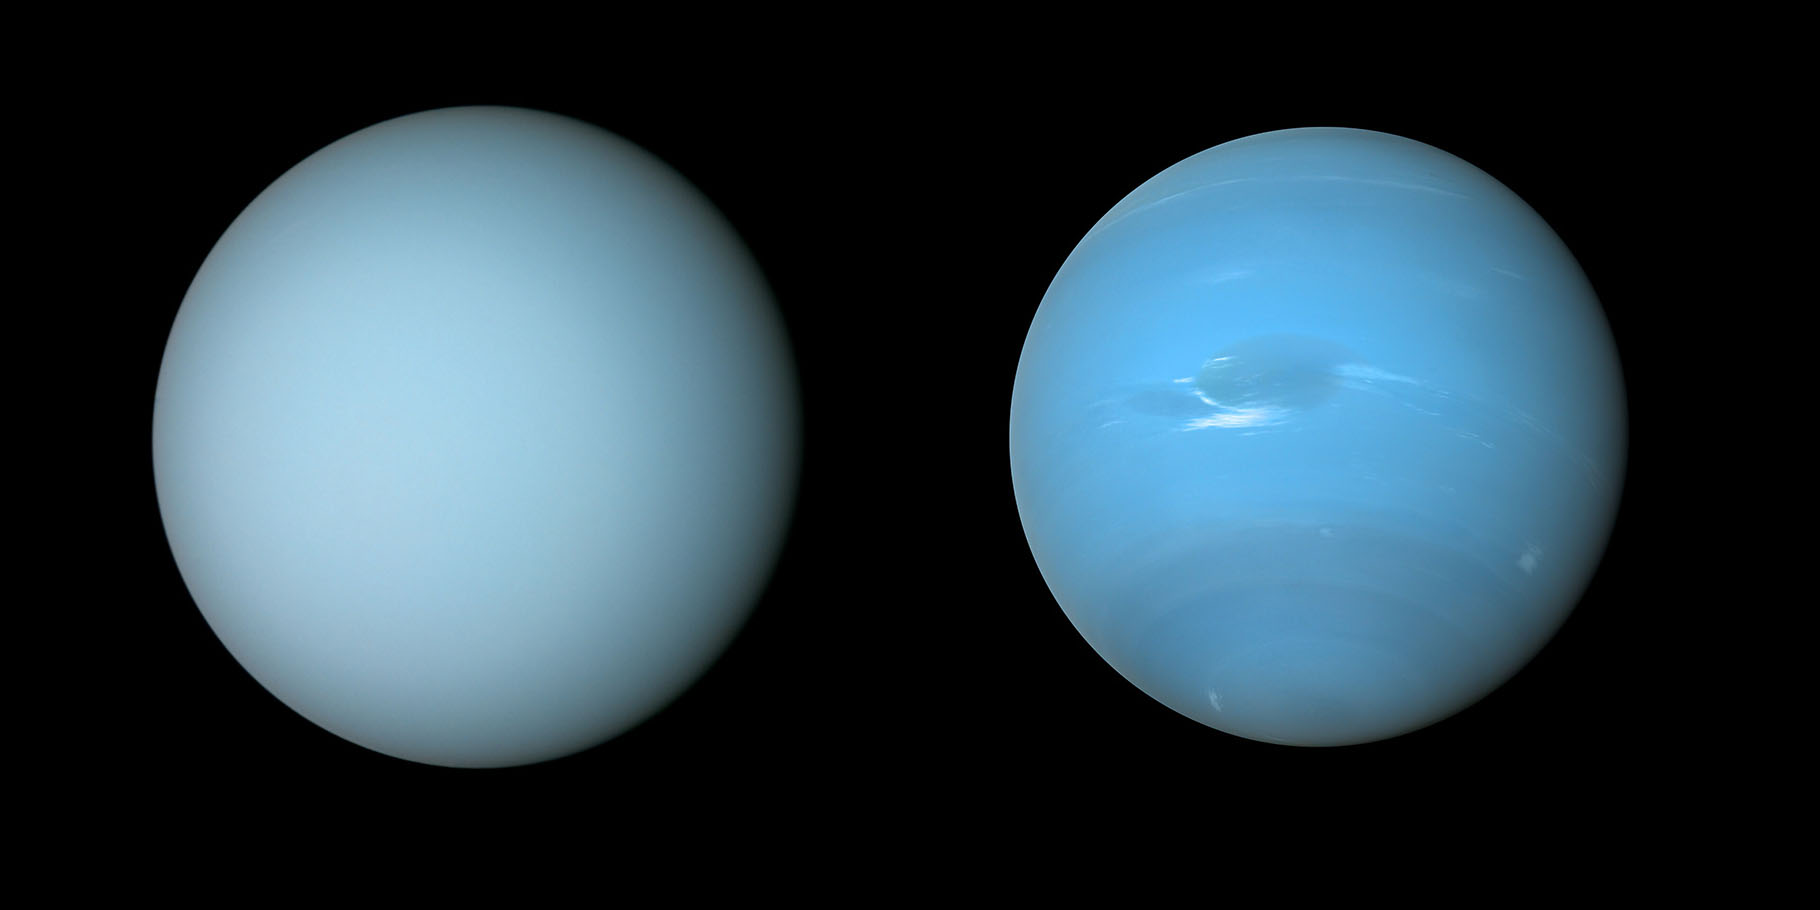 NASA’s Voyager 2 spacecraft captured these views of Uranus (on the left) and Neptune (on the right) during its flybys of the planets in the 1980s. Credit:NASA/JPL-Caltech/B. Jónsson